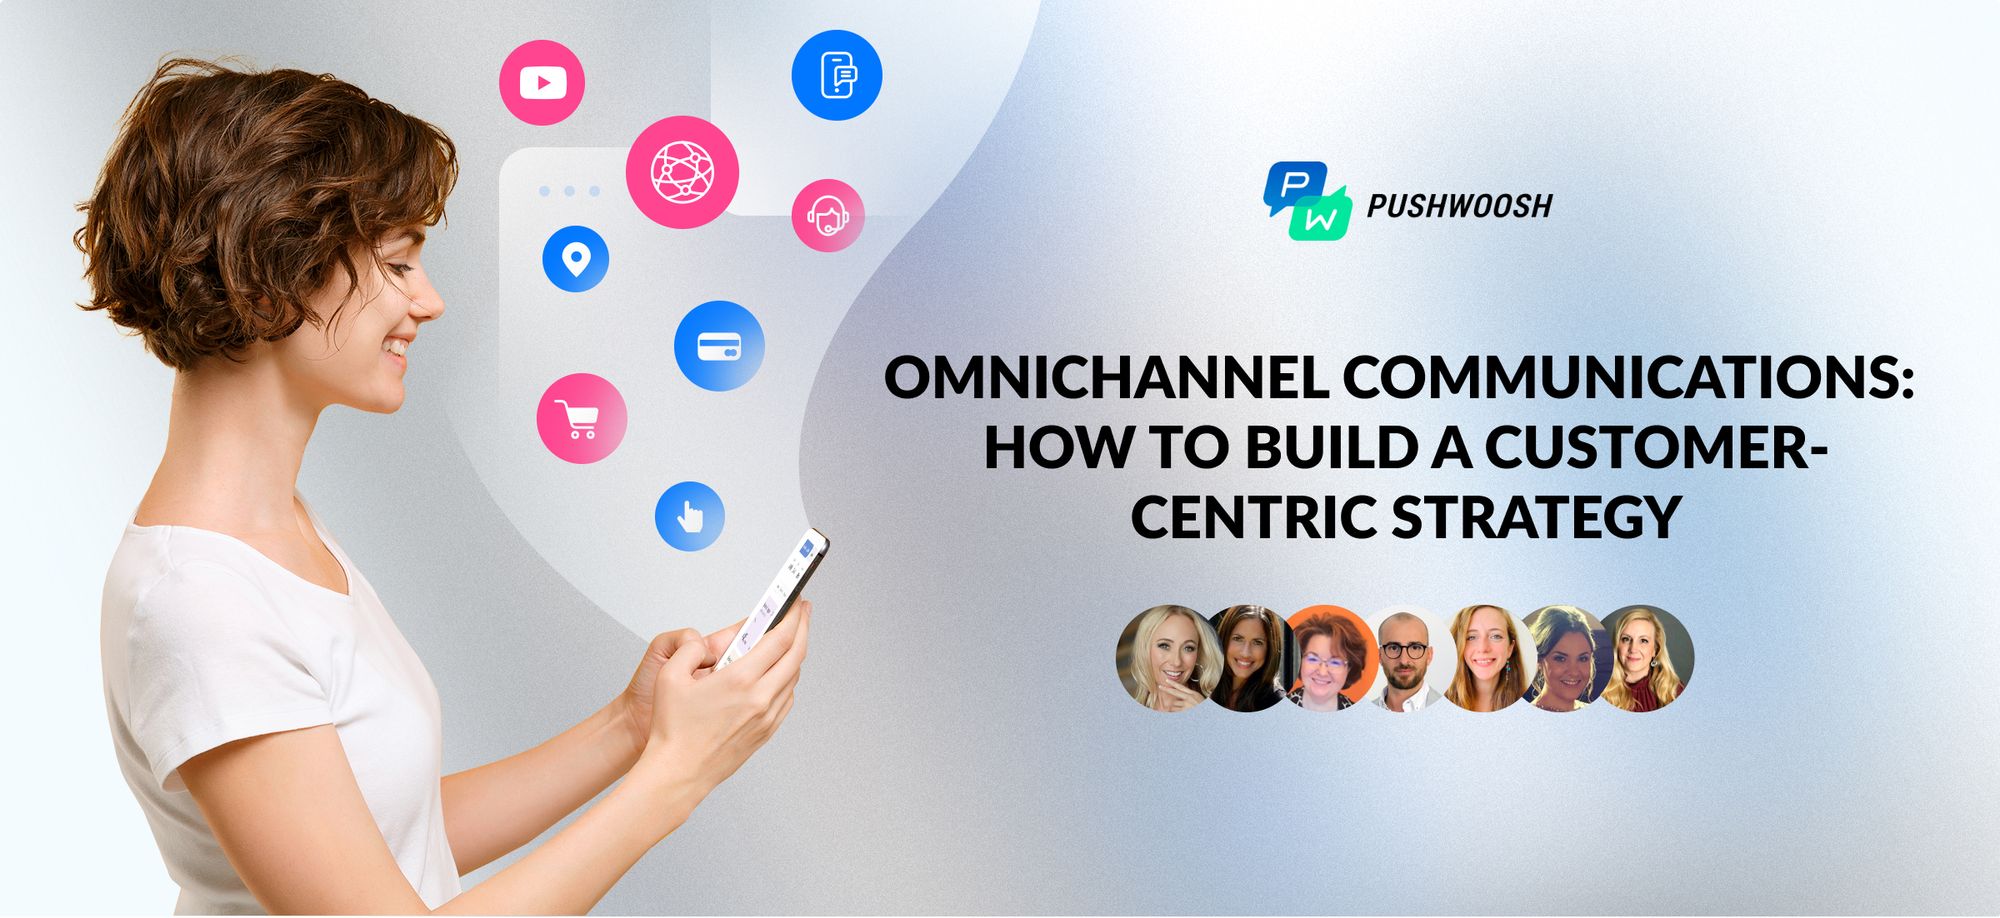 Omnichannel Communications: 
How to Build a Customer-Centric Strategy